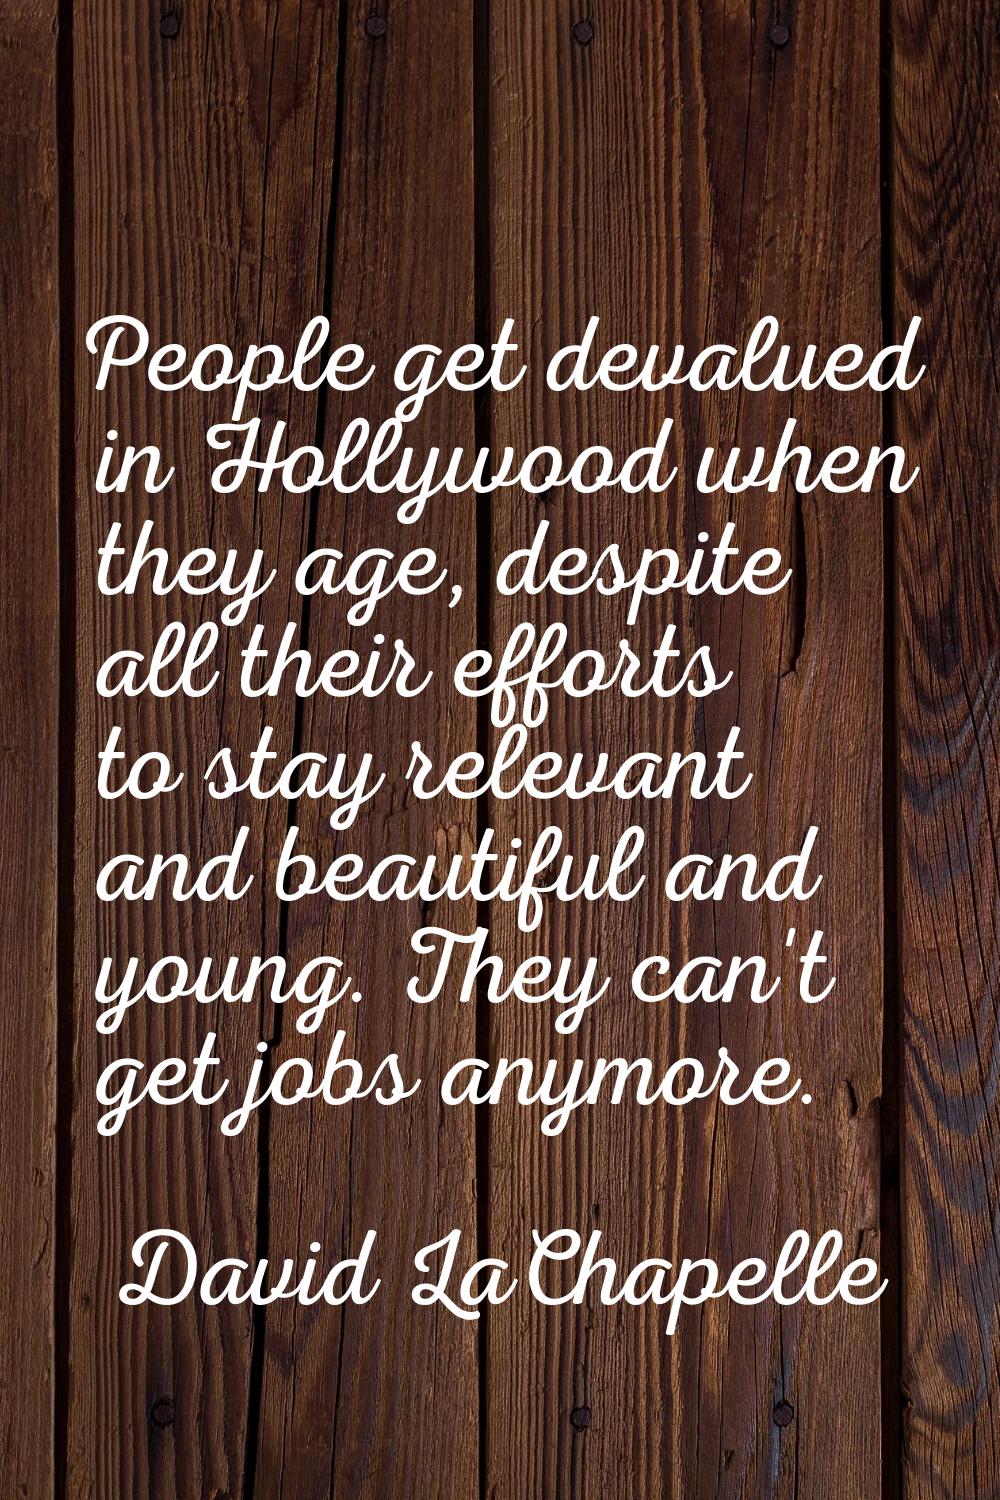 People get devalued in Hollywood when they age, despite all their efforts to stay relevant and beau